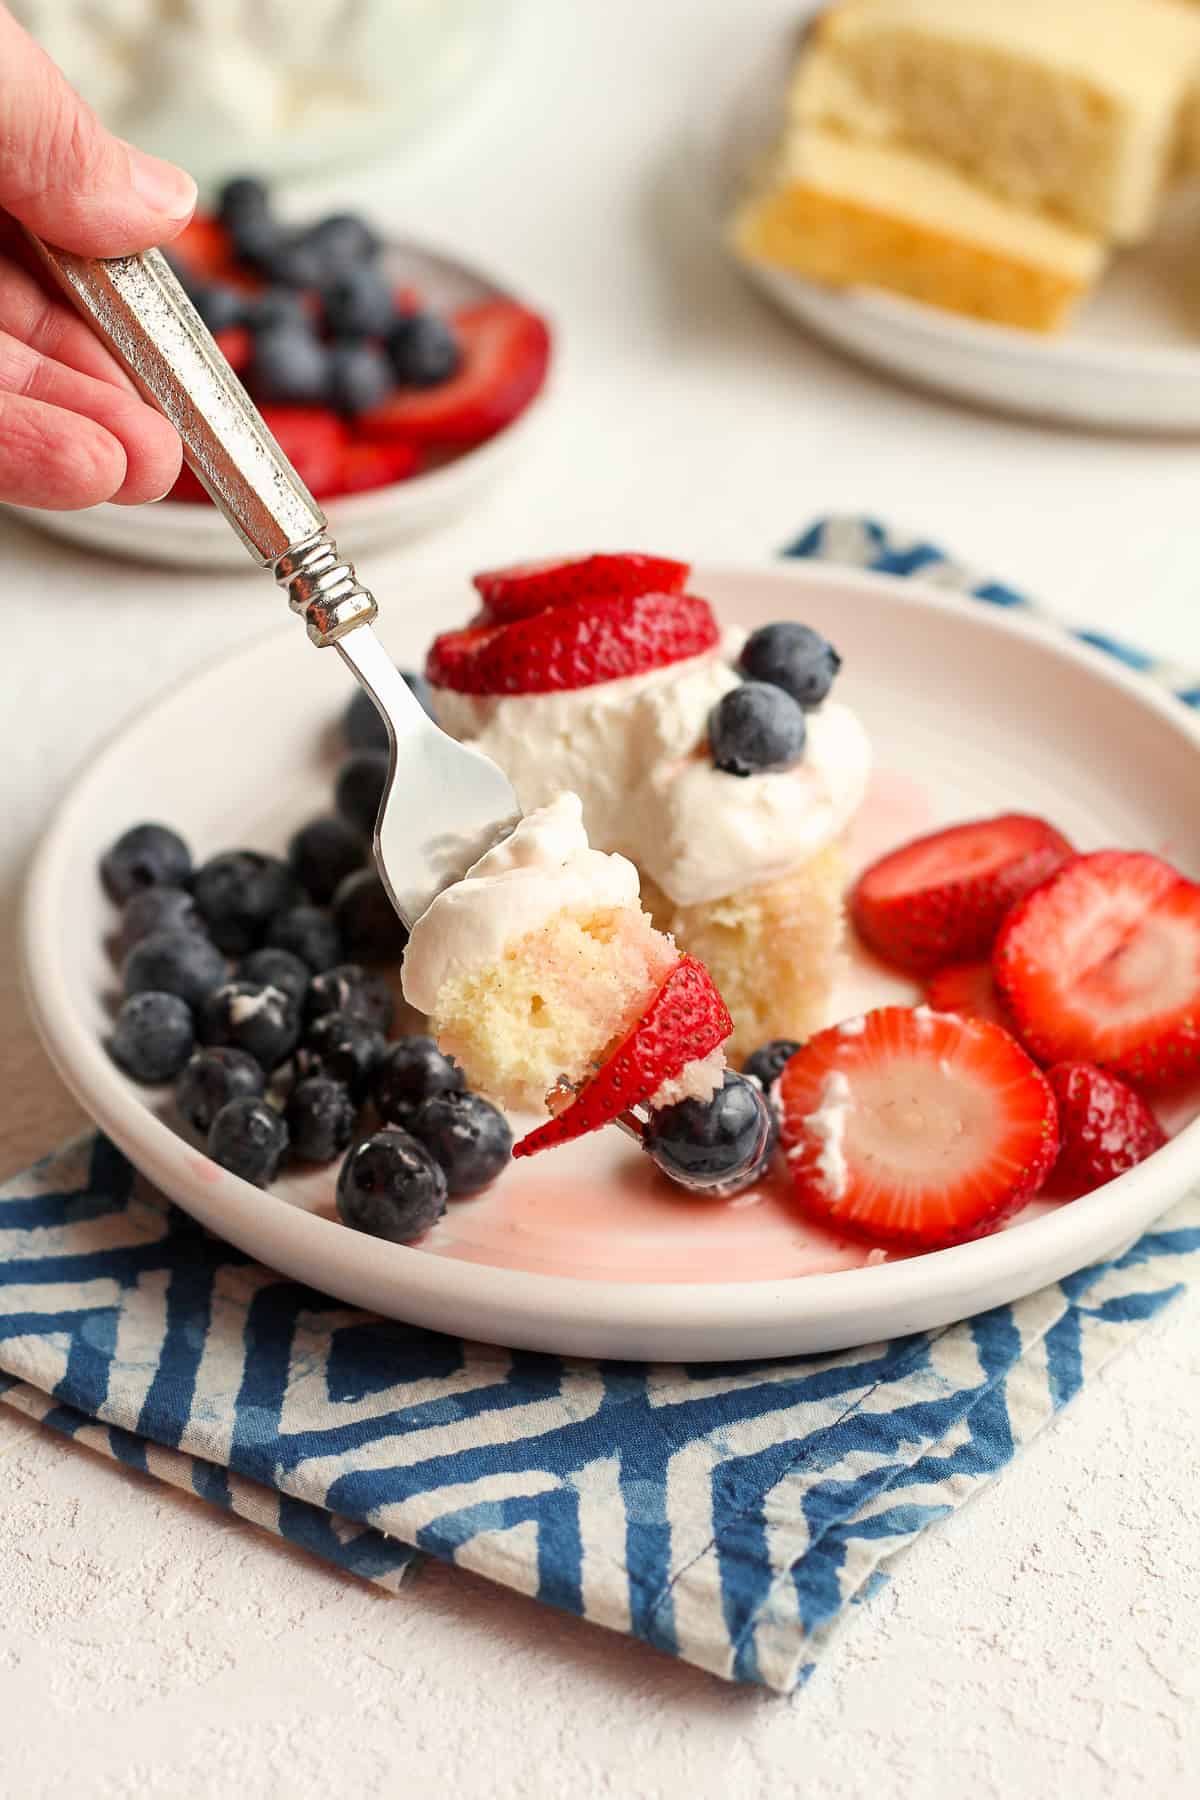 A forkful of moist strawberry shortcake on a white plate.